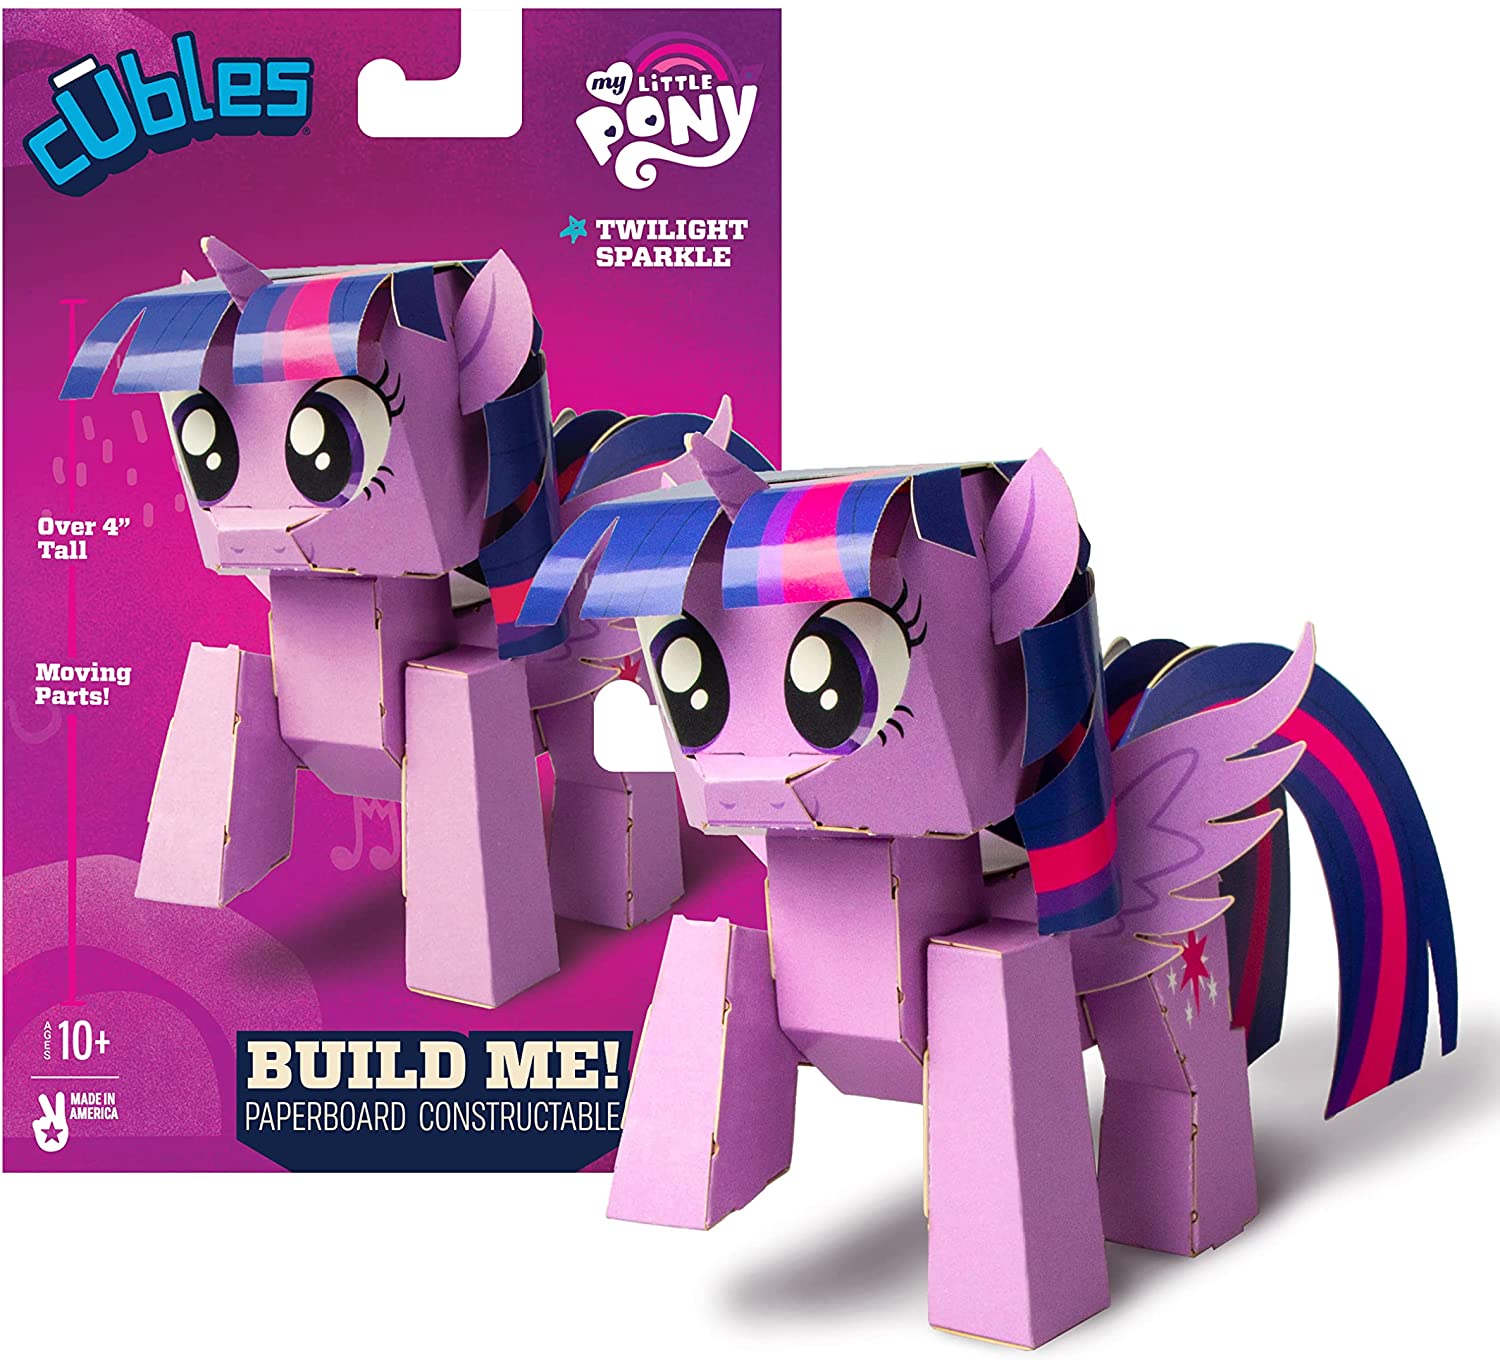 MLP Series 1 Pony Characters Paperboard Constructible 3-Pack Set 3